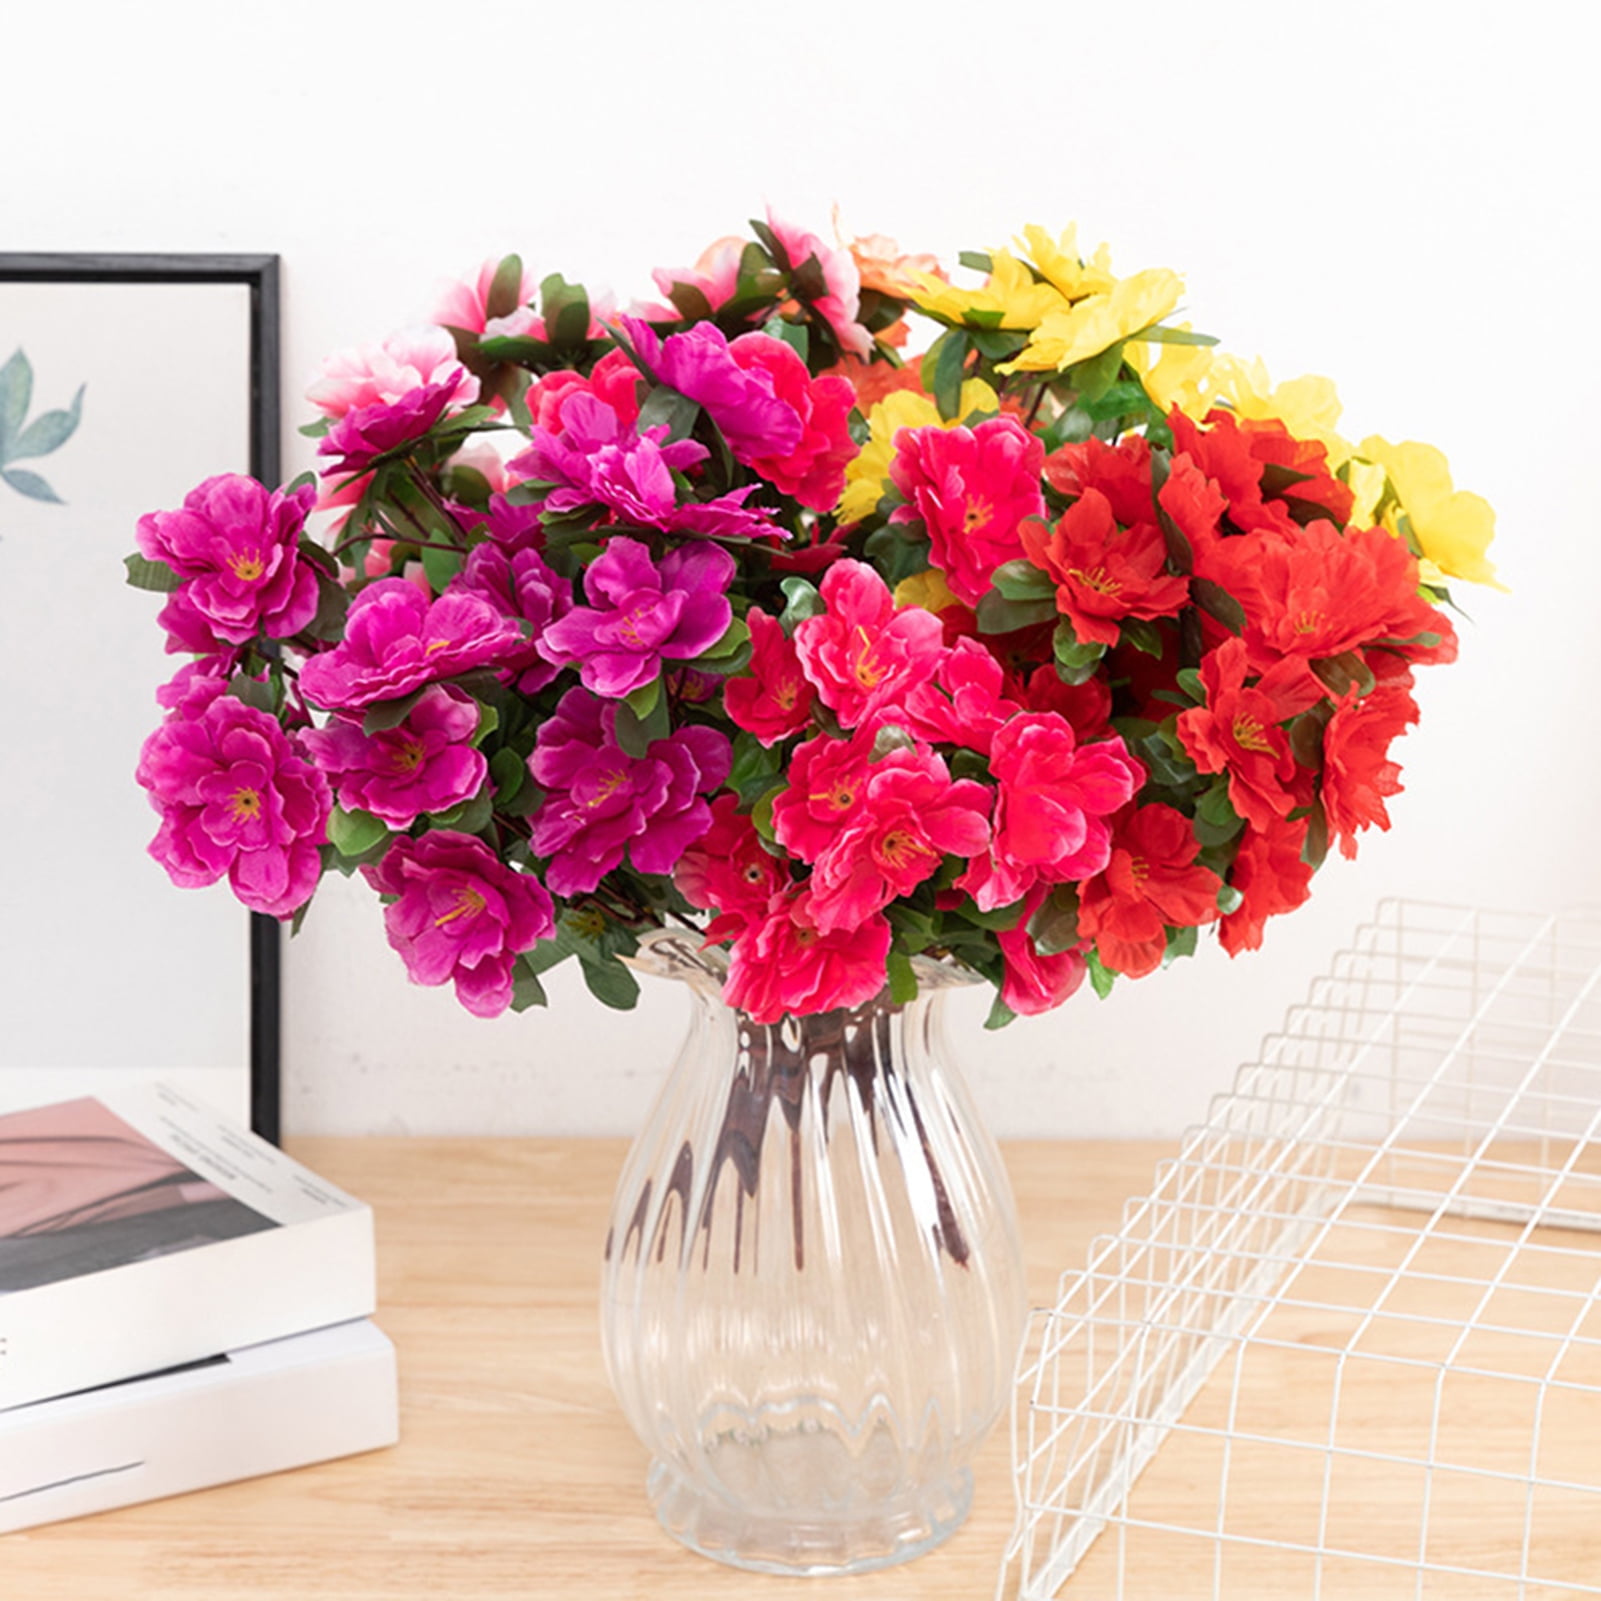 Vivid Artificial Rhododendron Flower Centerpieces Realistic Shooting Props For Decor